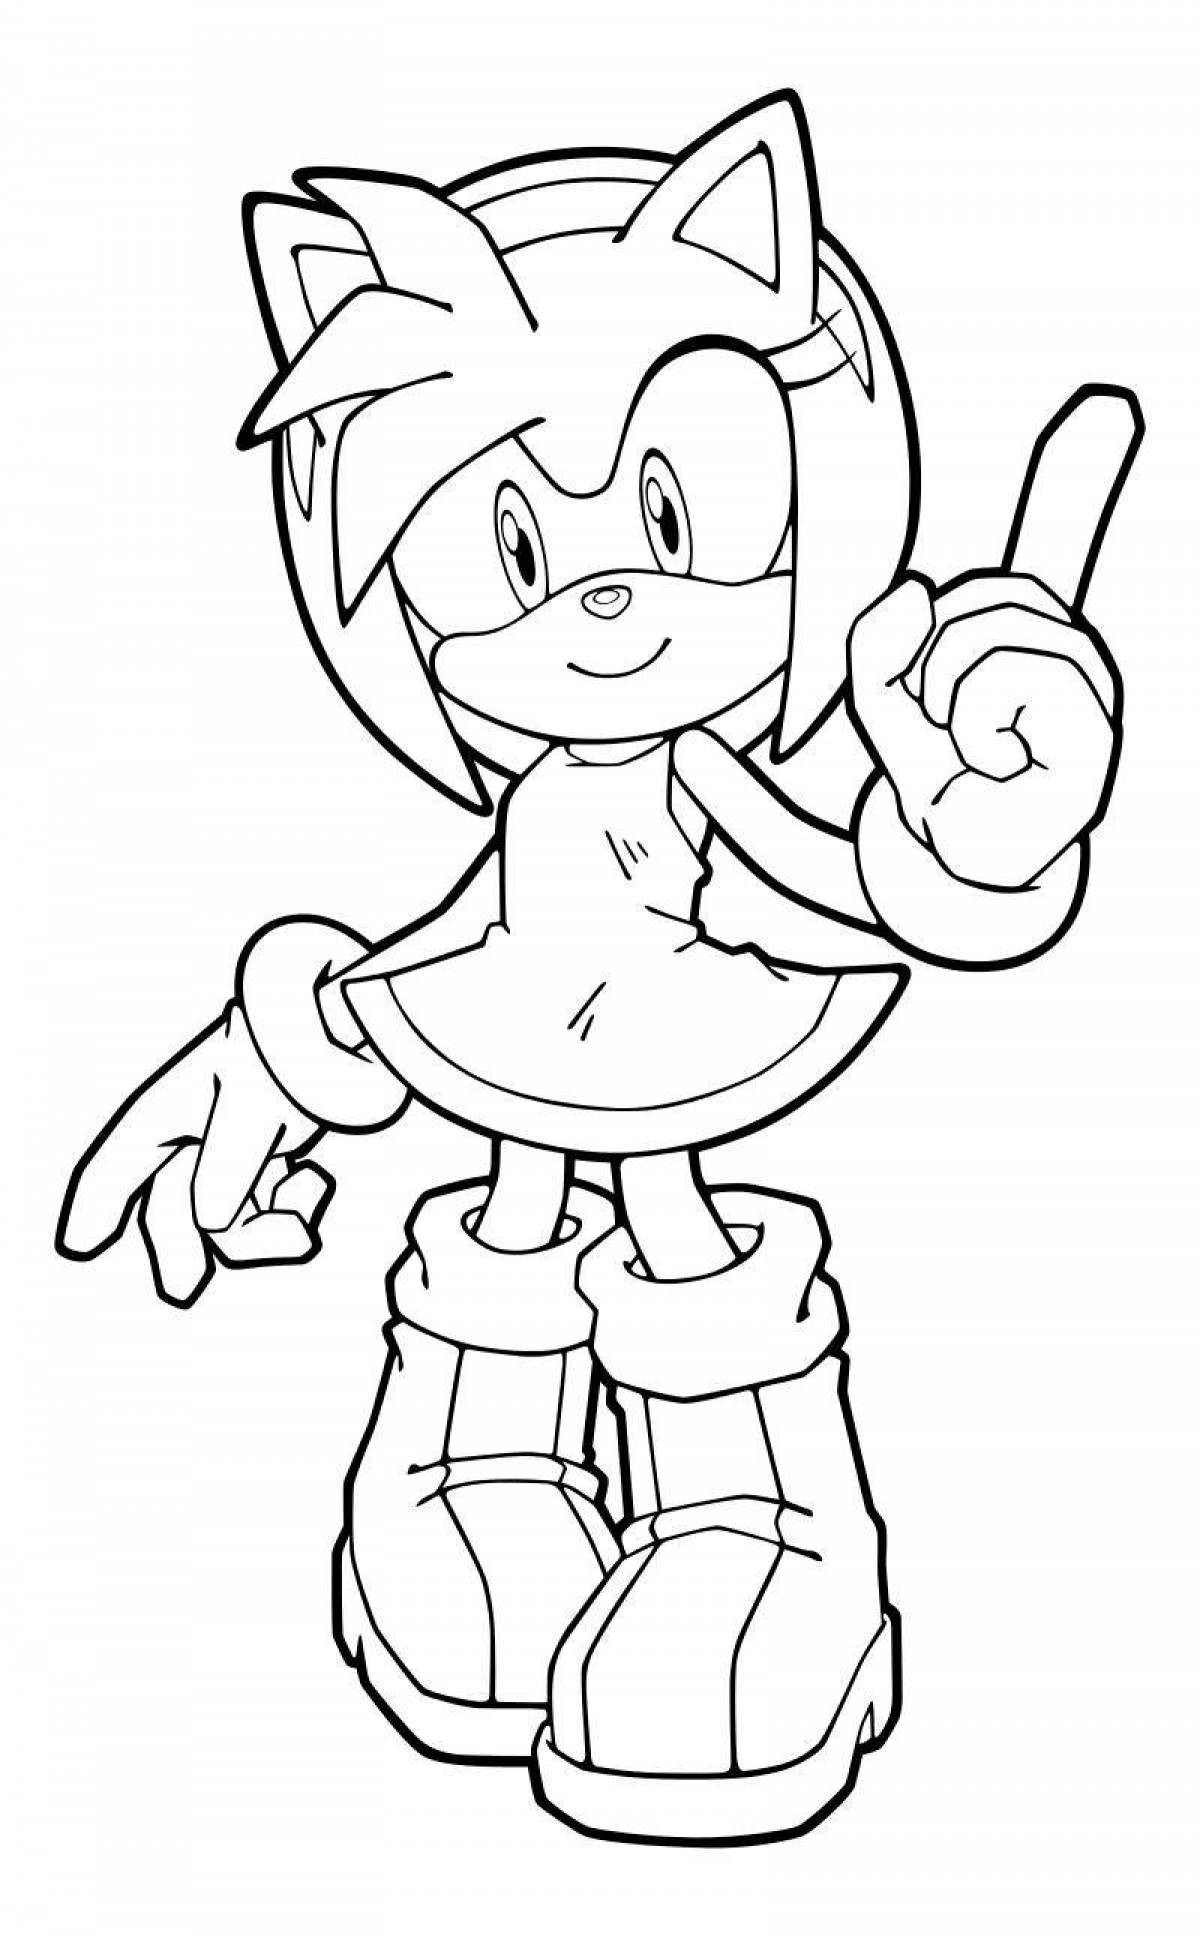 Tempting sonic girlfriend coloring book